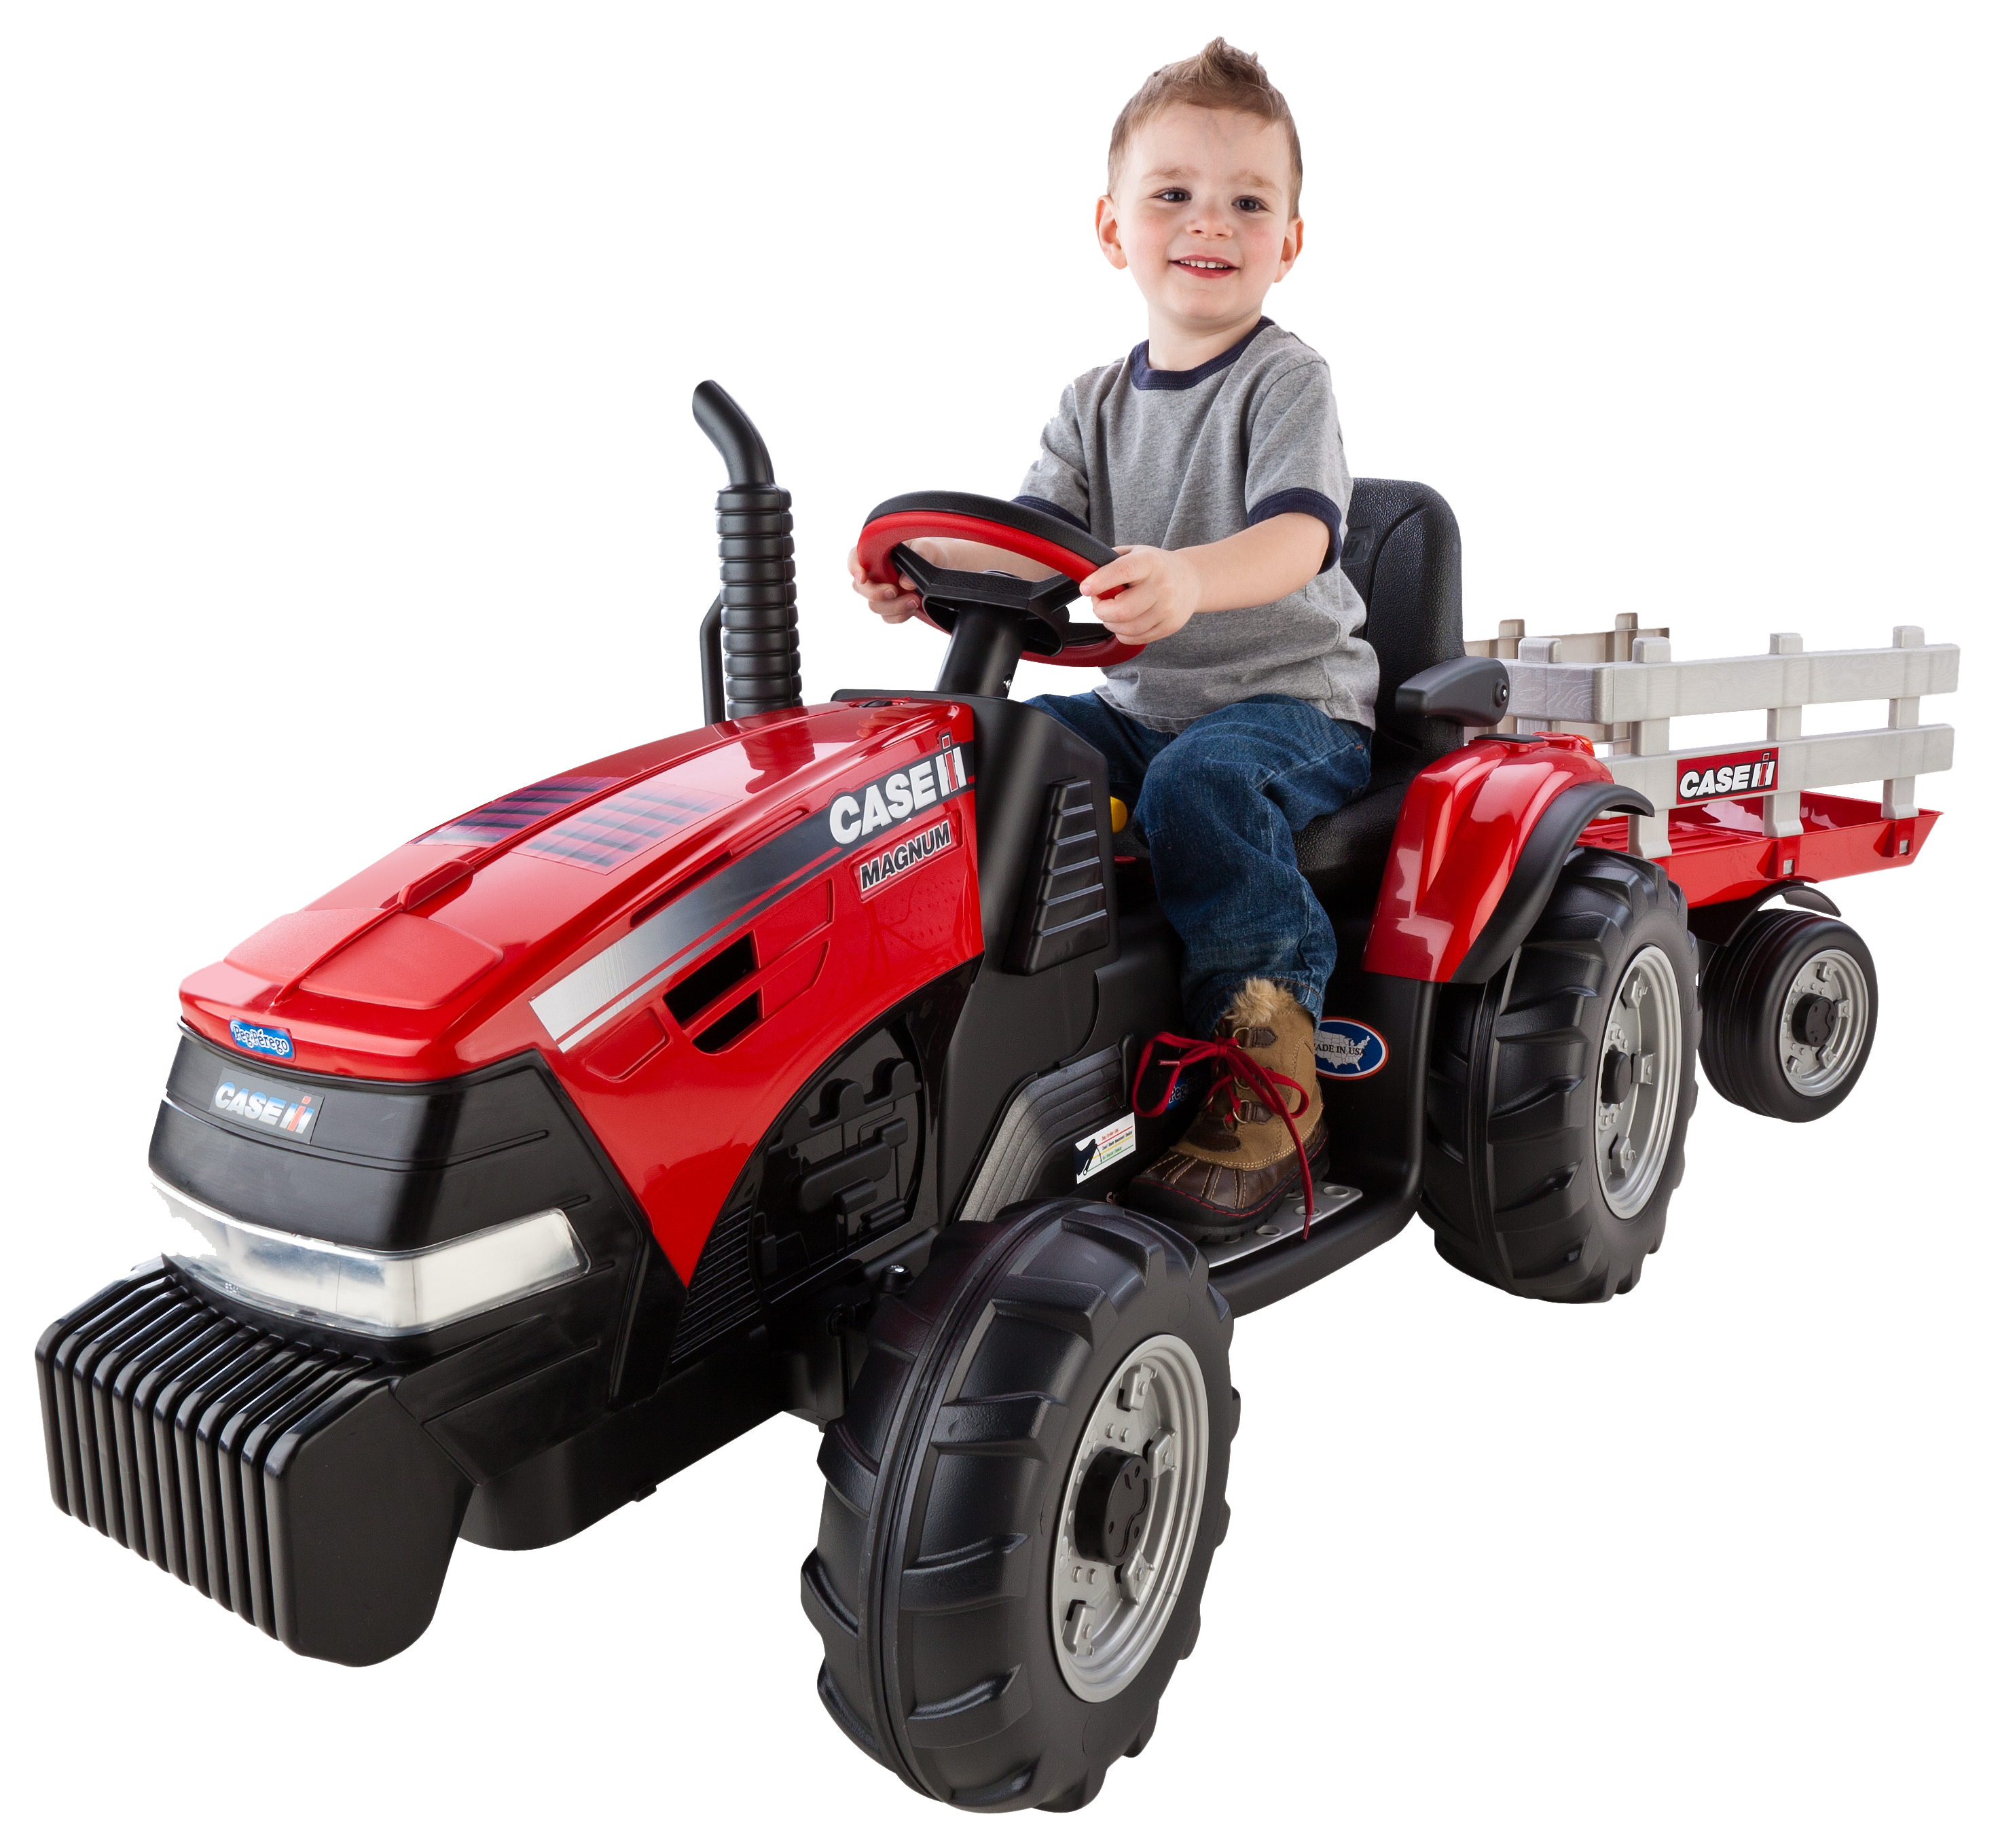 Peg-Perego CASE IH Magnum Tractor/Trailer Ride-On Toy for Kids